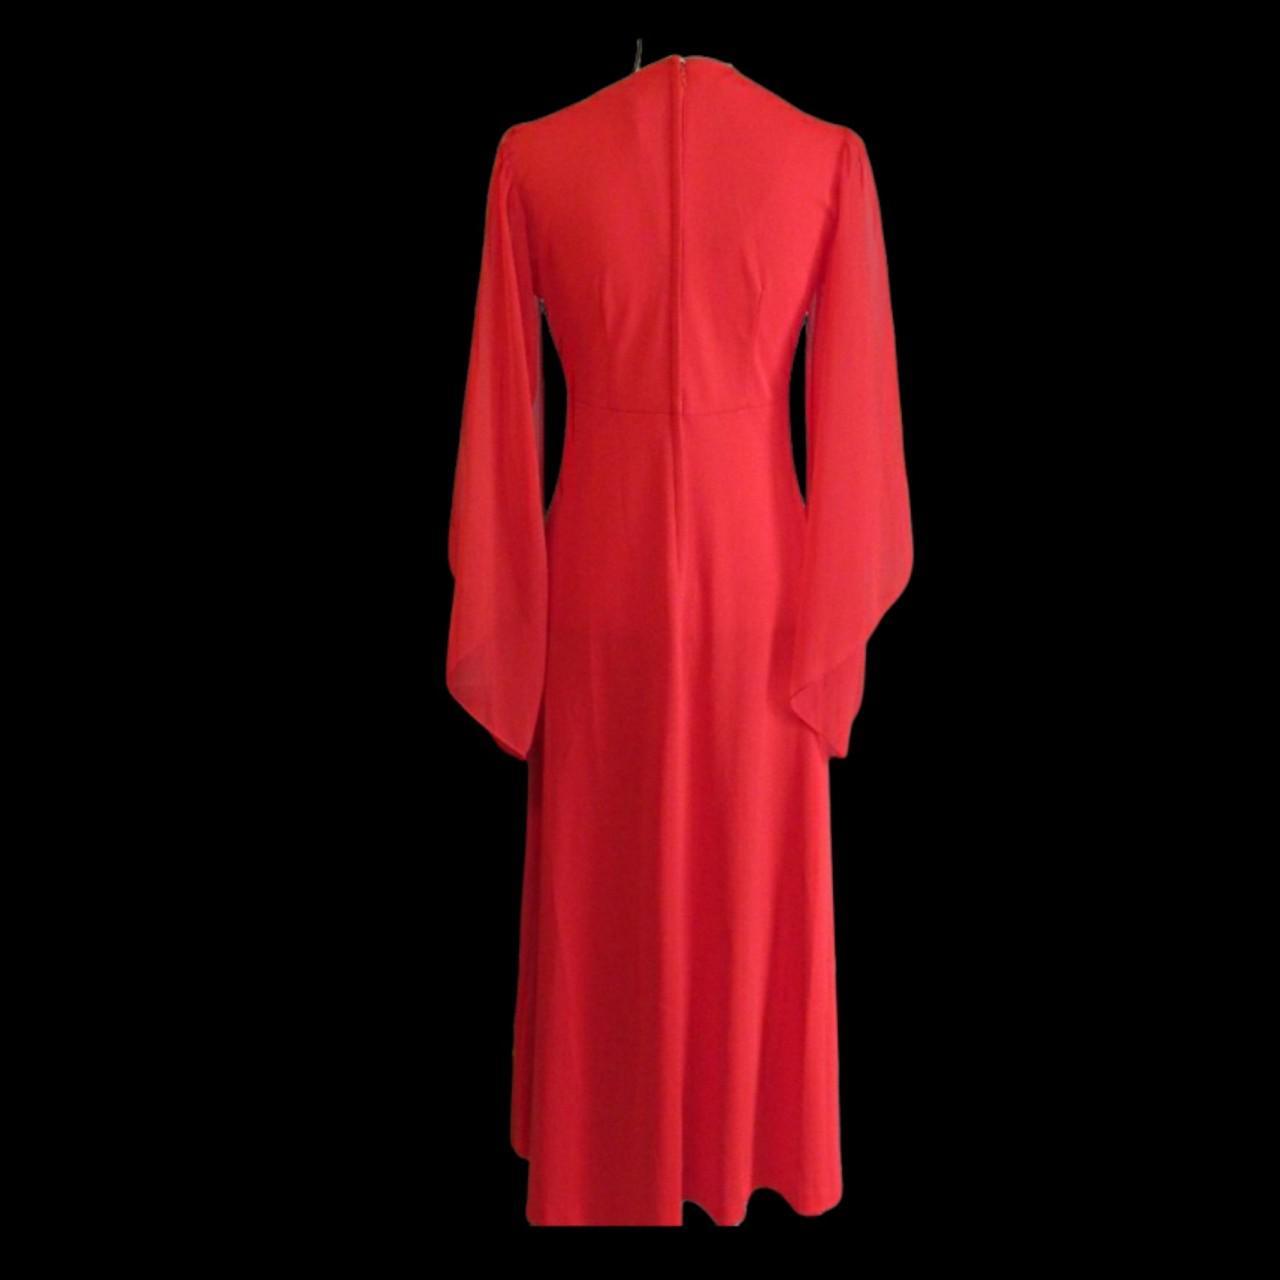 Product Image 2 - Vintage 70s long red dress